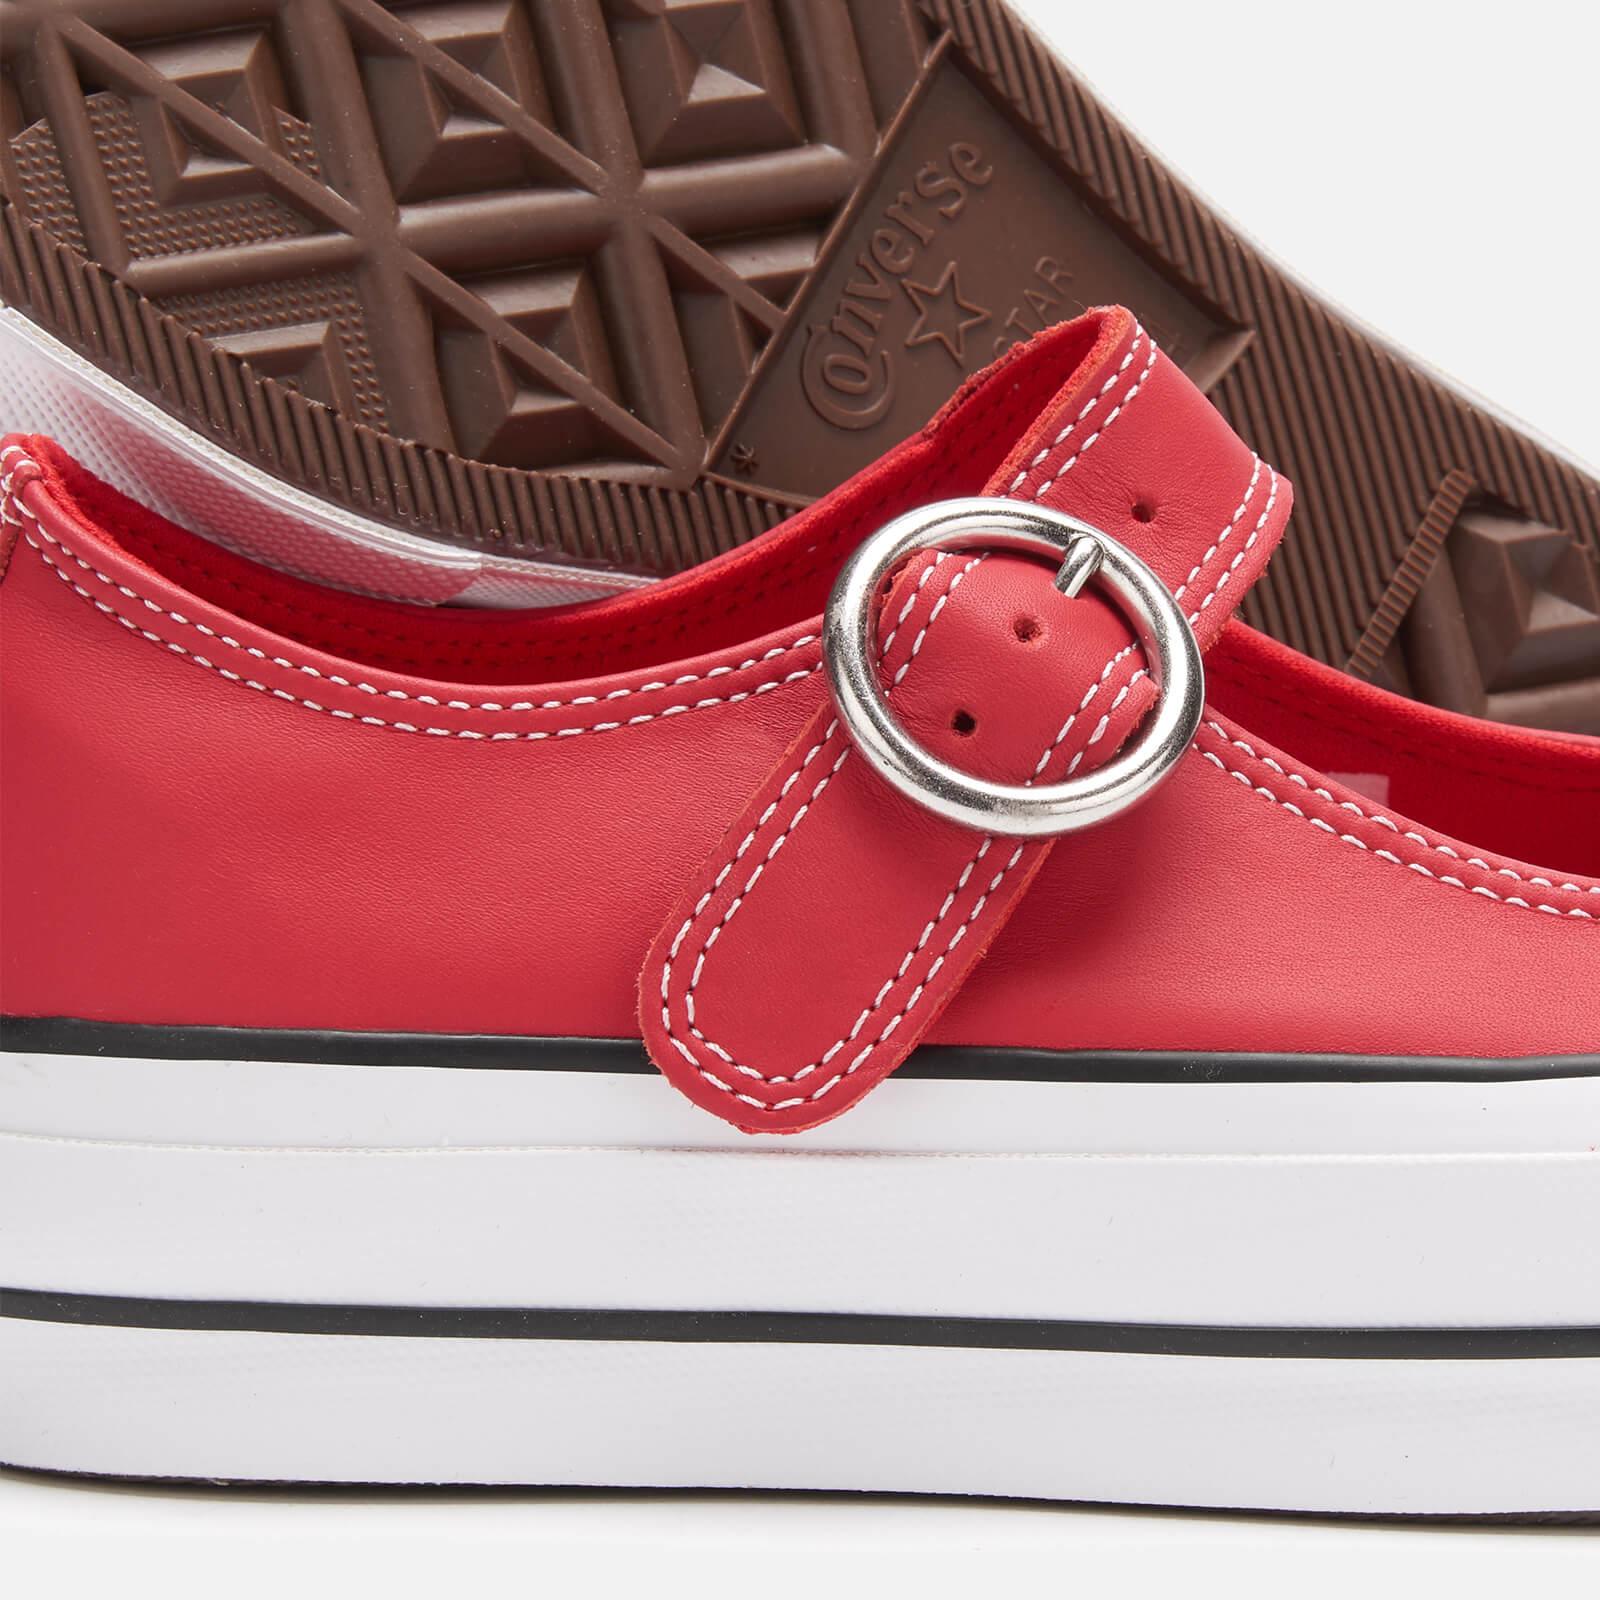 converse mary jane red